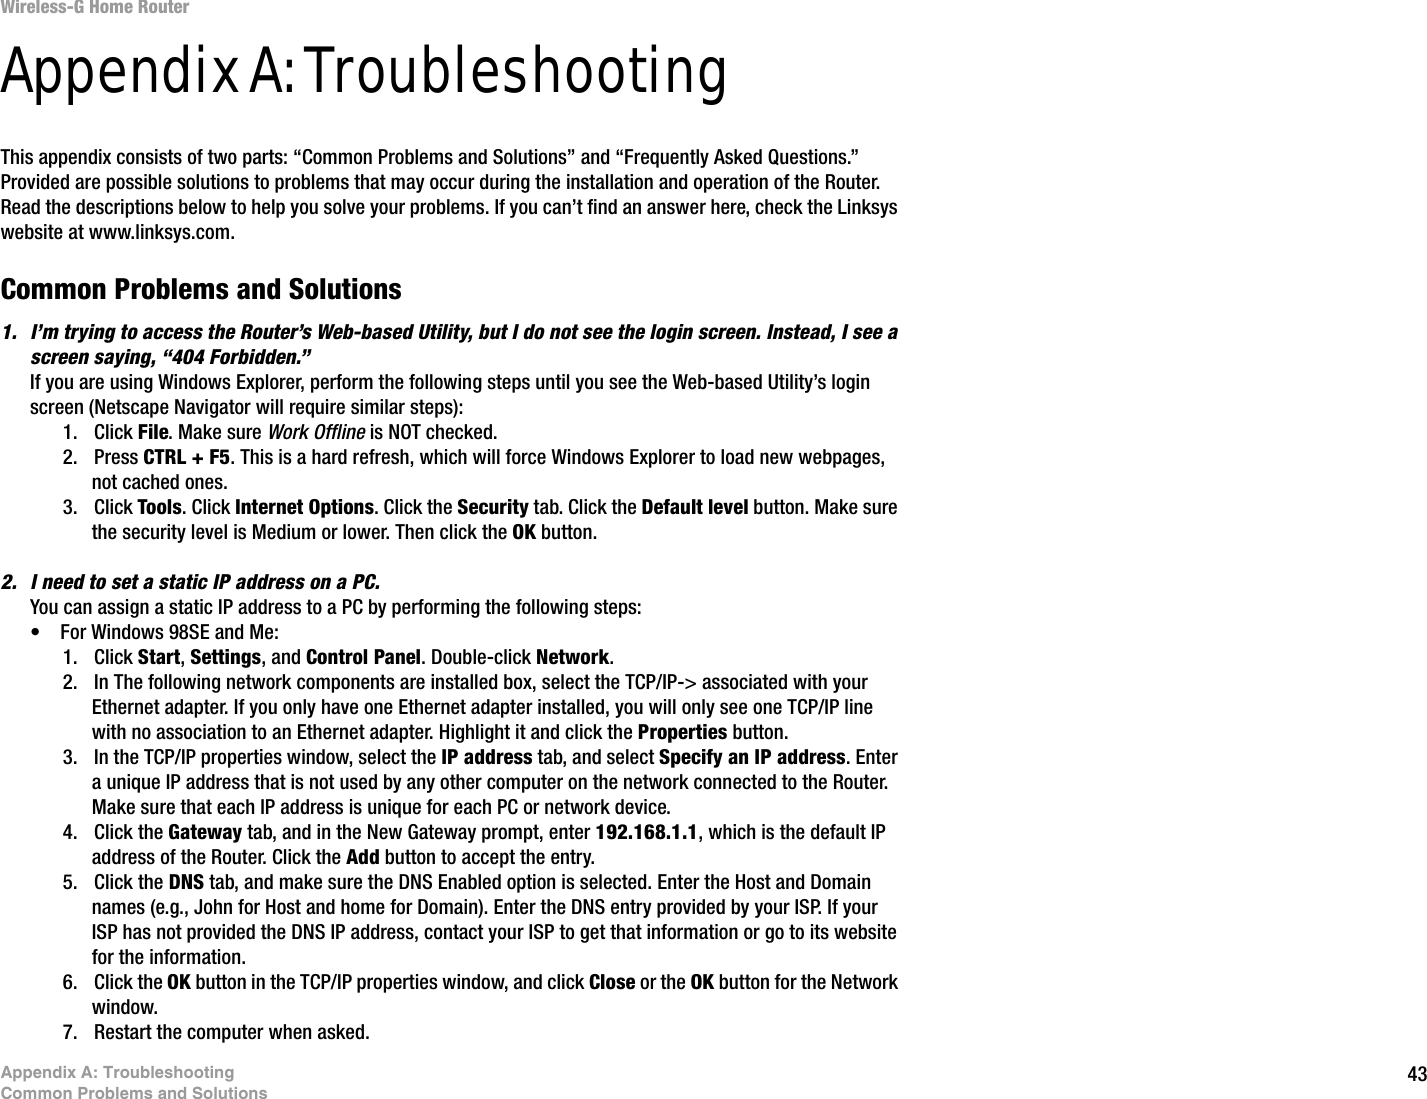 43Appendix A: TroubleshootingCommon Problems and SolutionsWireless-G Home RouterAppendix A: TroubleshootingThis appendix consists of two parts: “Common Problems and Solutions” and “Frequently Asked Questions.” Provided are possible solutions to problems that may occur during the installation and operation of the Router. Read the descriptions below to help you solve your problems. If you can’t find an answer here, check the Linksys website at www.linksys.com.Common Problems and Solutions1. I’m trying to access the Router’s Web-based Utility, but I do not see the login screen. Instead, I see a screen saying, “404 Forbidden.”If you are using Windows Explorer, perform the following steps until you see the Web-based Utility’s login screen (Netscape Navigator will require similar steps):1. Click File. Make sure Work Offline is NOT checked.2. Press CTRL + F5. This is a hard refresh, which will force Windows Explorer to load new webpages, not cached ones.3. Click Tools. Click Internet Options. Click the Security tab. Click the Default level button. Make sure the security level is Medium or lower. Then click the OK button.2. I need to set a static IP address on a PC.You can assign a static IP address to a PC by performing the following steps:• For Windows 98SE and Me:1. Click Start, Settings, and Control Panel. Double-click Network.2. In The following network components are installed box, select the TCP/IP-&gt; associated with your Ethernet adapter. If you only have one Ethernet adapter installed, you will only see one TCP/IP line with no association to an Ethernet adapter. Highlight it and click the Properties button.3. In the TCP/IP properties window, select the IP address tab, and select Specify an IP address. Enter a unique IP address that is not used by any other computer on the network connected to the Router. Make sure that each IP address is unique for each PC or network device.4. Click the Gateway tab, and in the New Gateway prompt, enter 192.168.1.1, which is the default IP address of the Router. Click the Add button to accept the entry.5. Click the DNS tab, and make sure the DNS Enabled option is selected. Enter the Host and Domain names (e.g., John for Host and home for Domain). Enter the DNS entry provided by your ISP. If your ISP has not provided the DNS IP address, contact your ISP to get that information or go to its website for the information.6. Click the OK button in the TCP/IP properties window, and click Close or the OK button for the Network window.7. Restart the computer when asked.